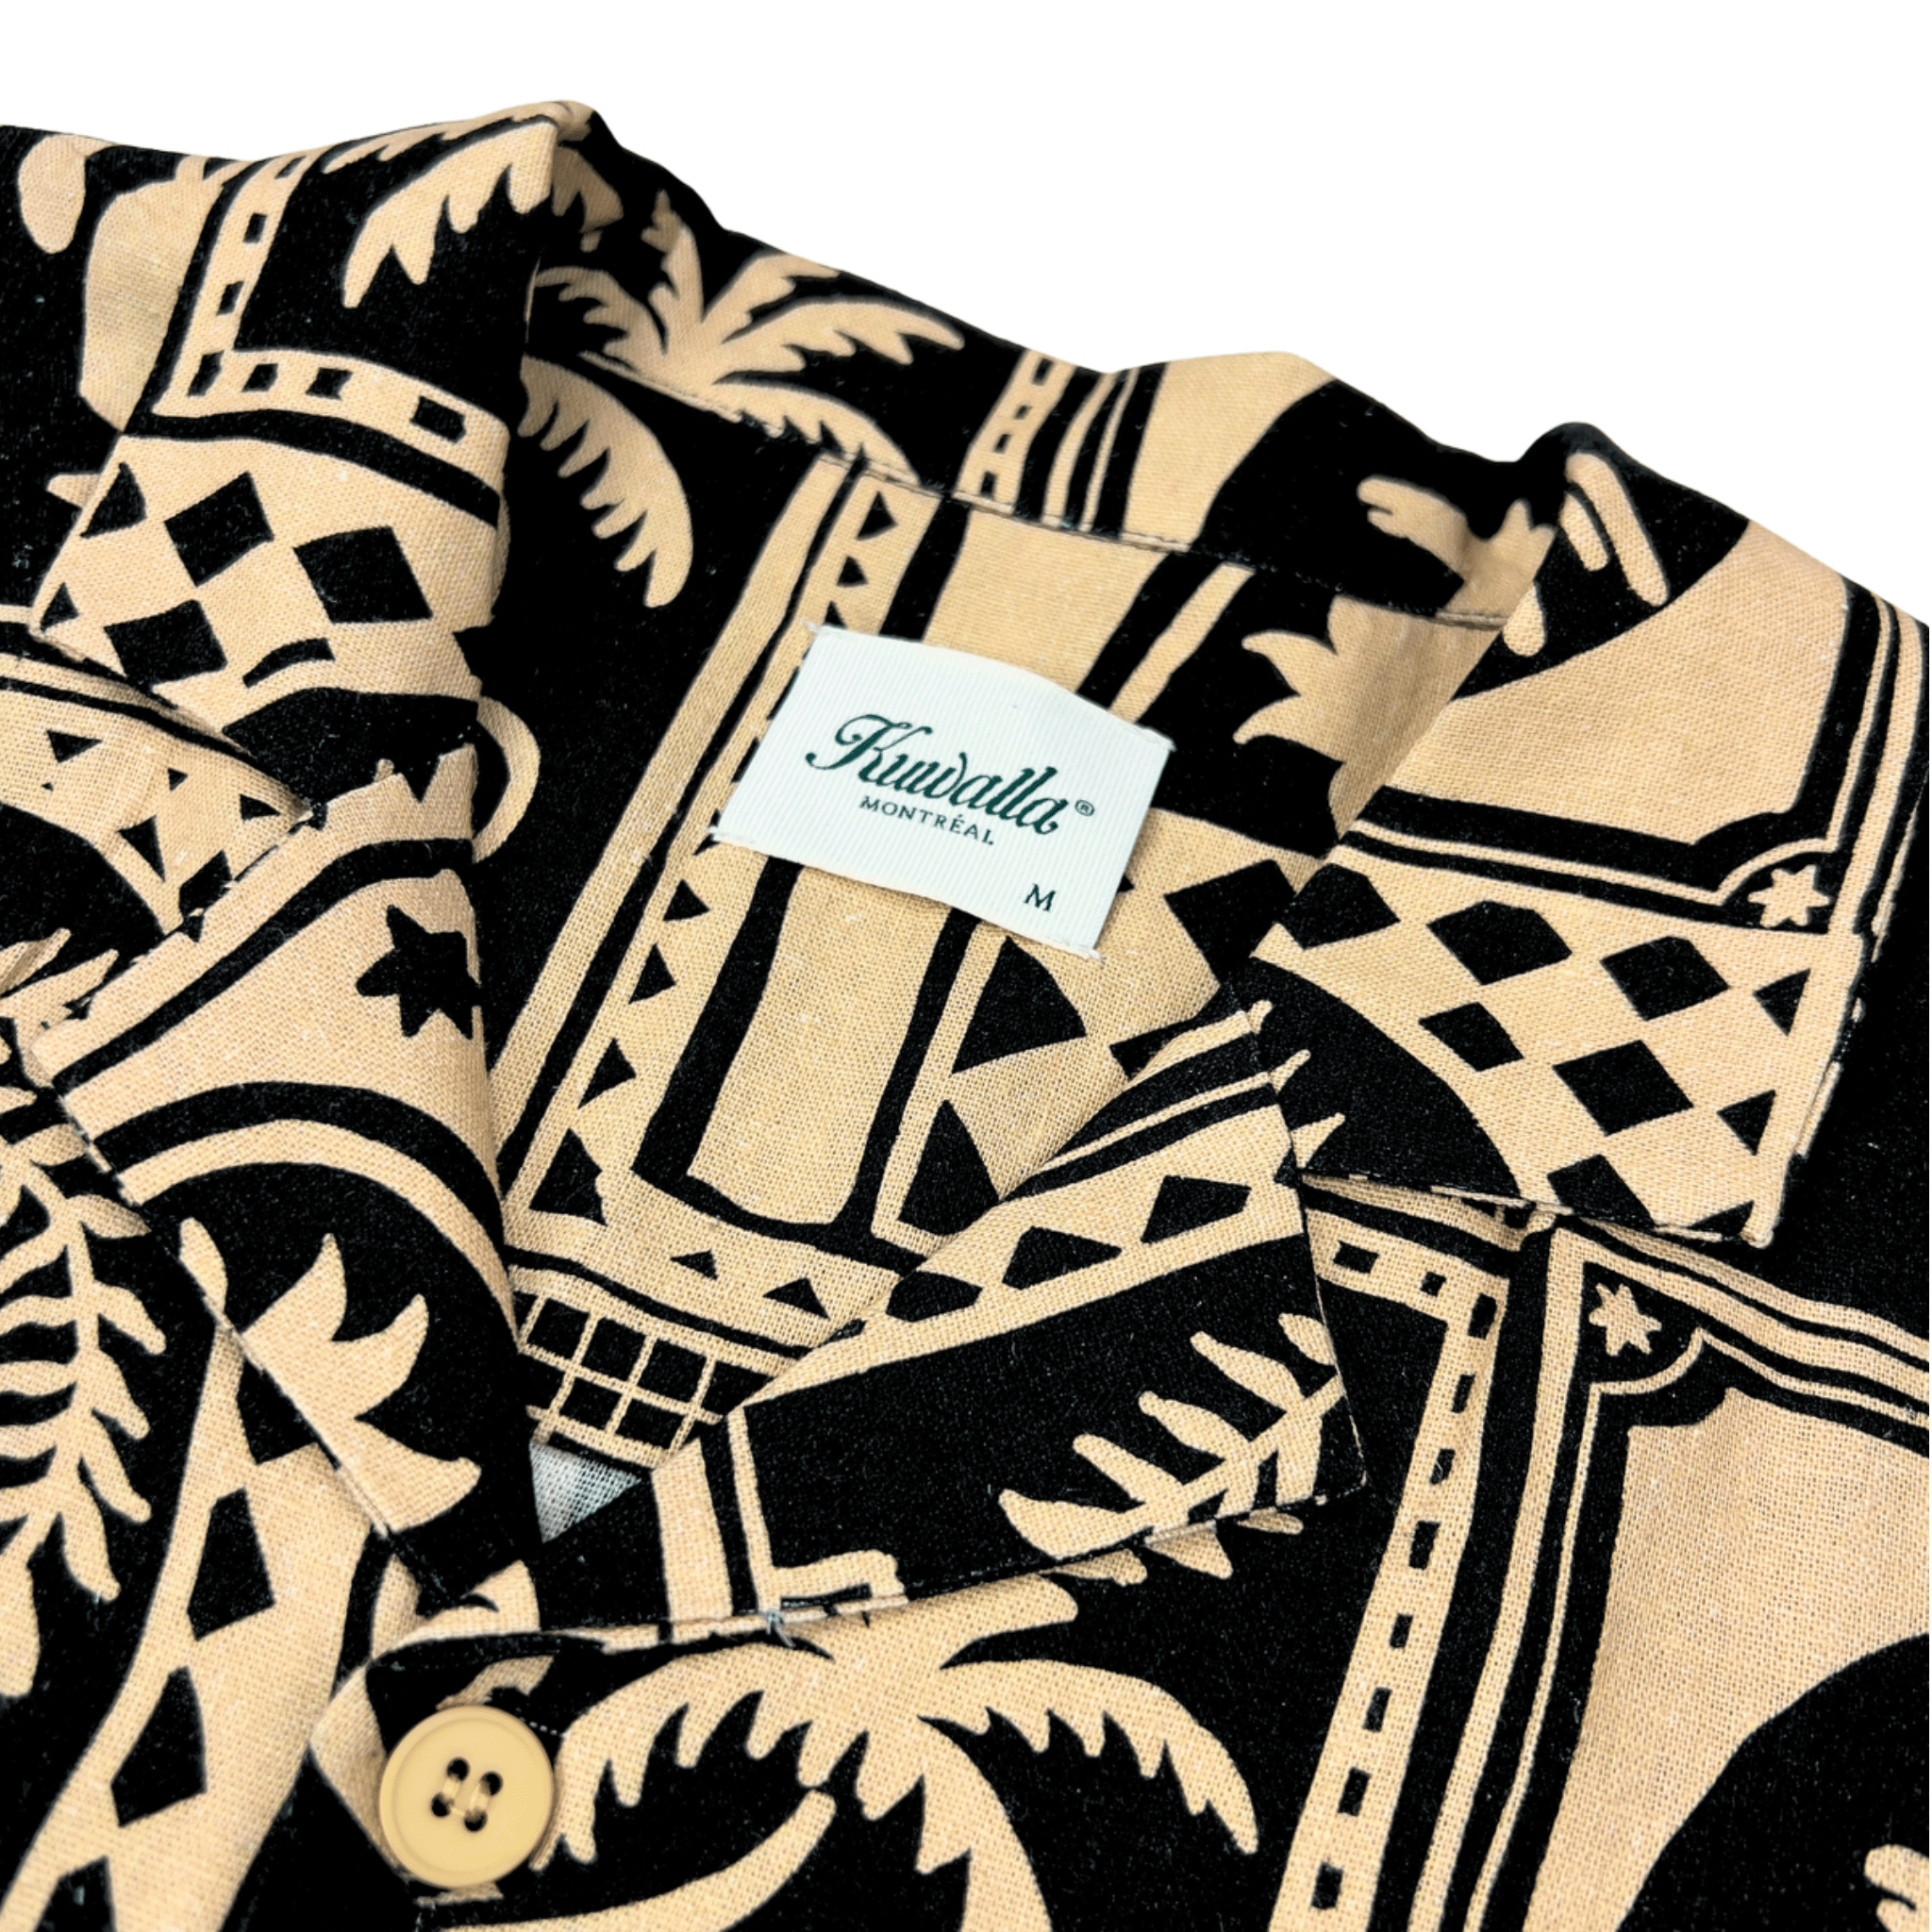 Linen Printed Yacht Shirt in black and beige